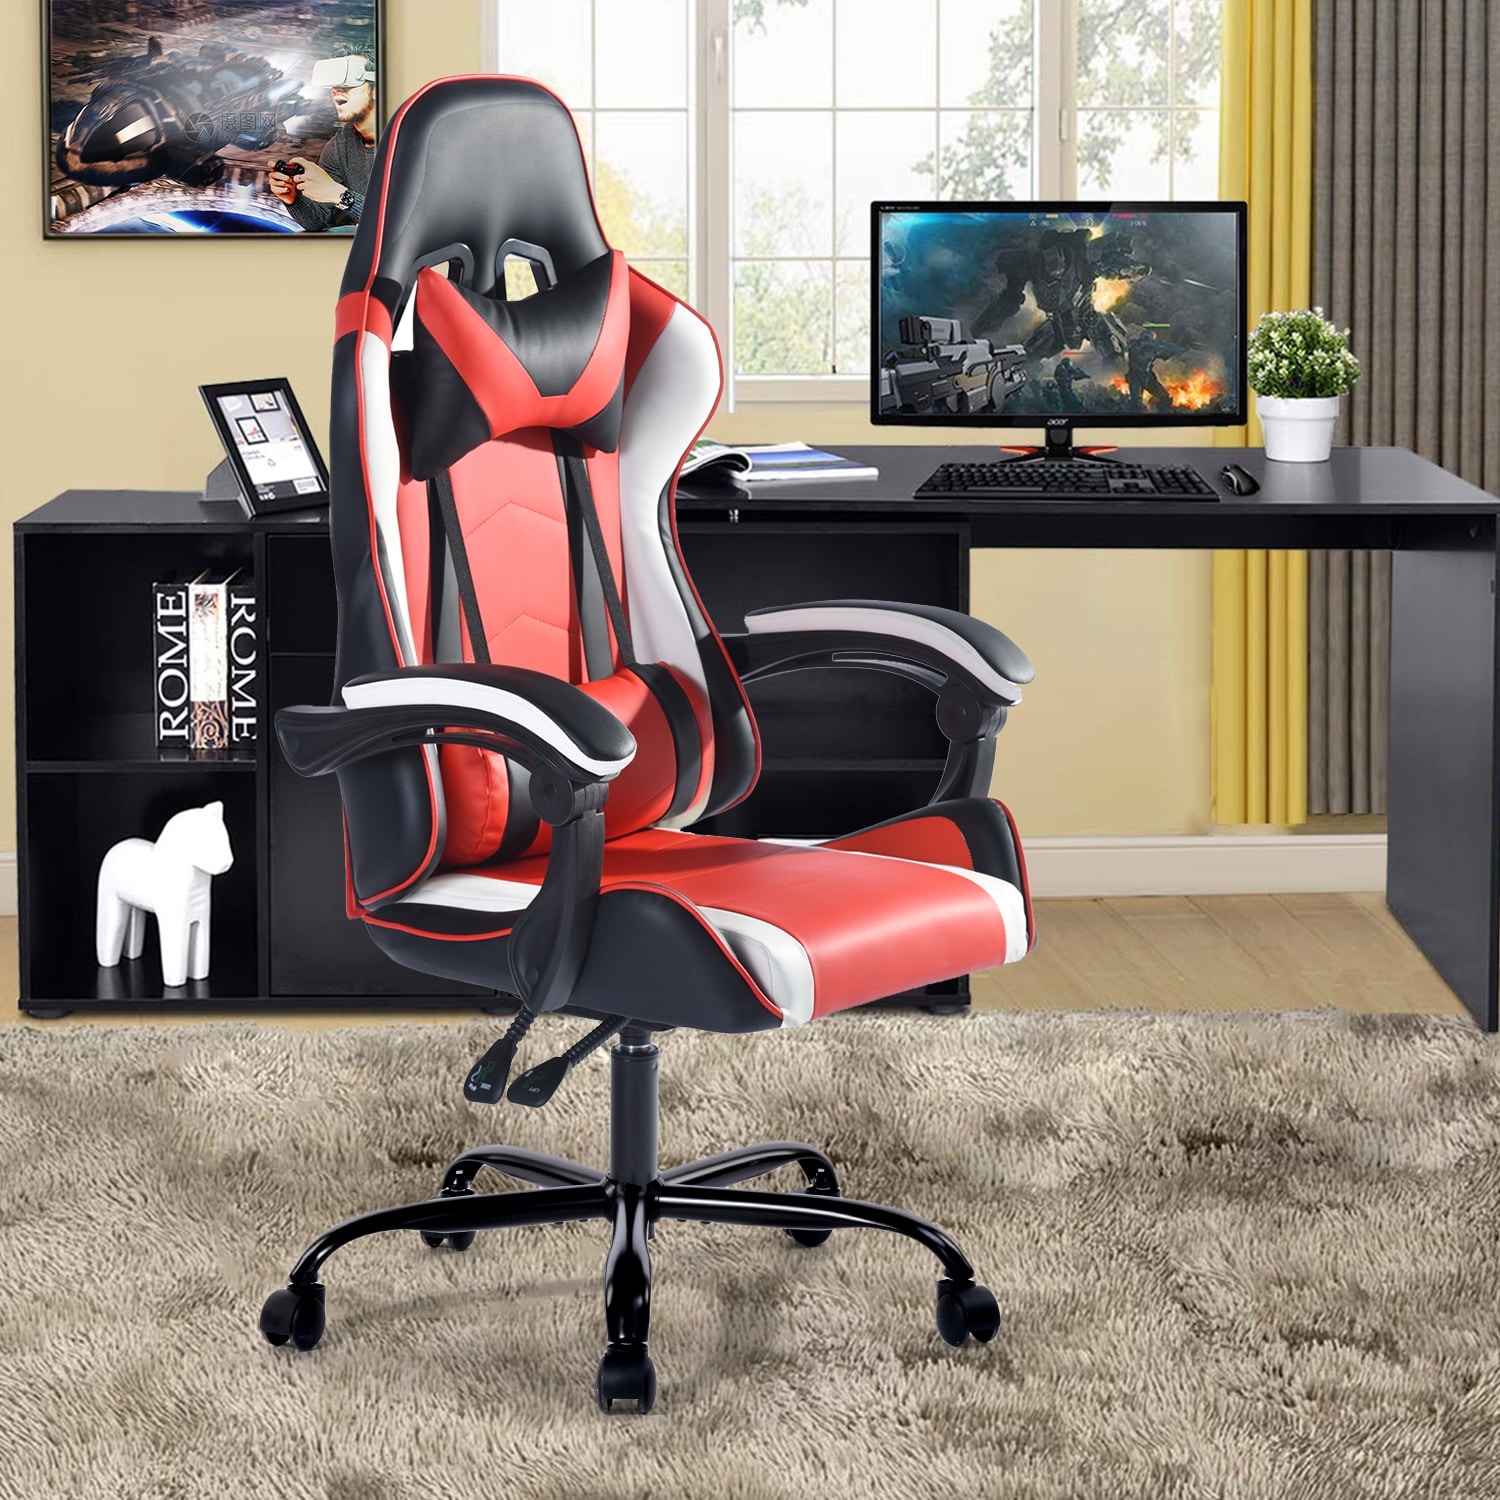 https://ak1.ostkcdn.com/images/products/is/images/direct/b194d2d119e76b3ef66784db8c345e5f199a4488/Homylin-Vantana-Ergonomic-Gaming-Chair-High-Back-PU-with-Lumbar-Support-and-Footrest-Red.jpg